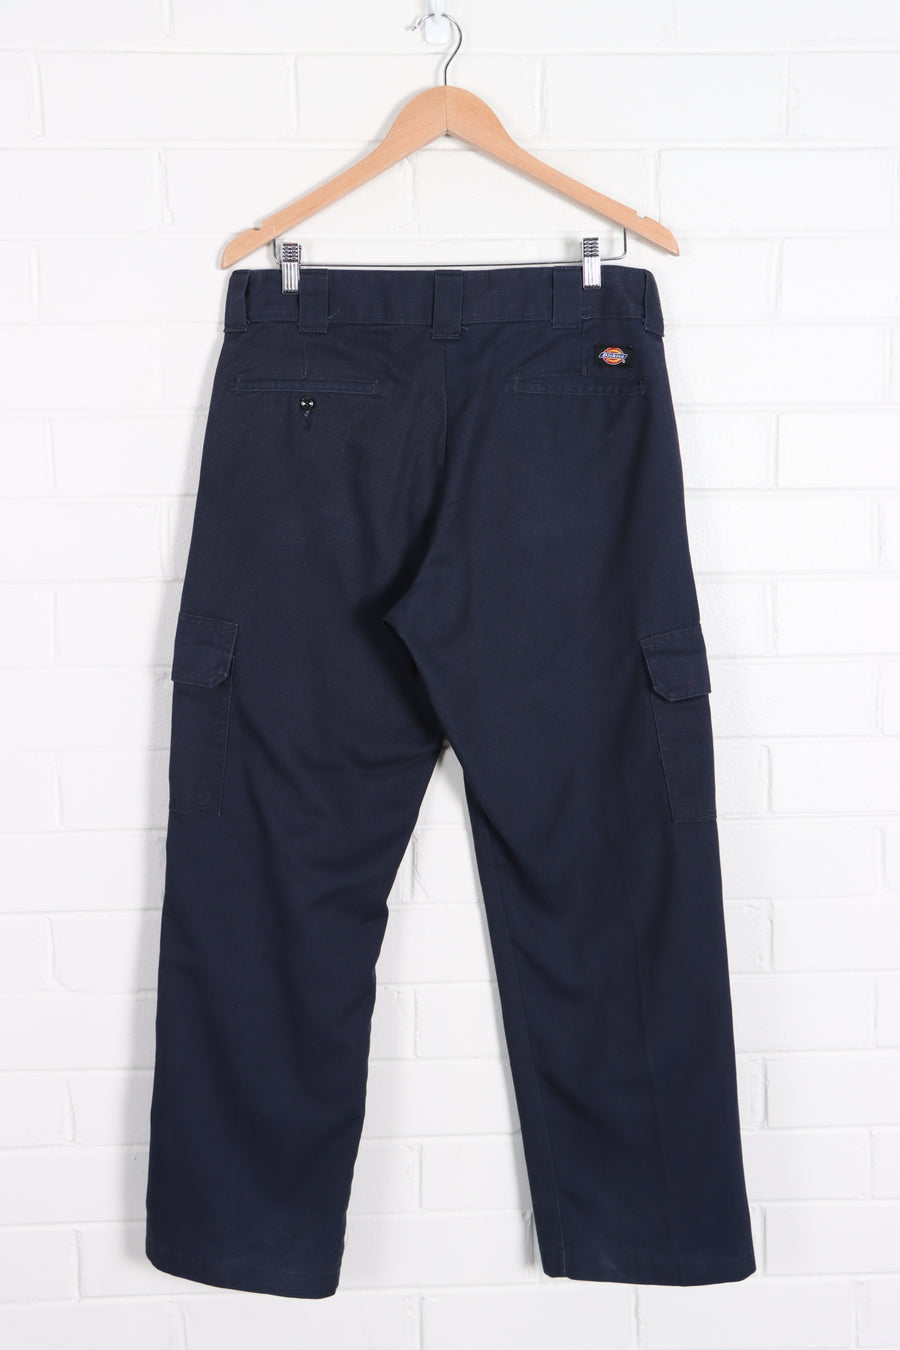 DICKIES Dark Navy Blue 'Relaxed Straight' Workwear Pants (34x30) - Vintage Sole Melbourne